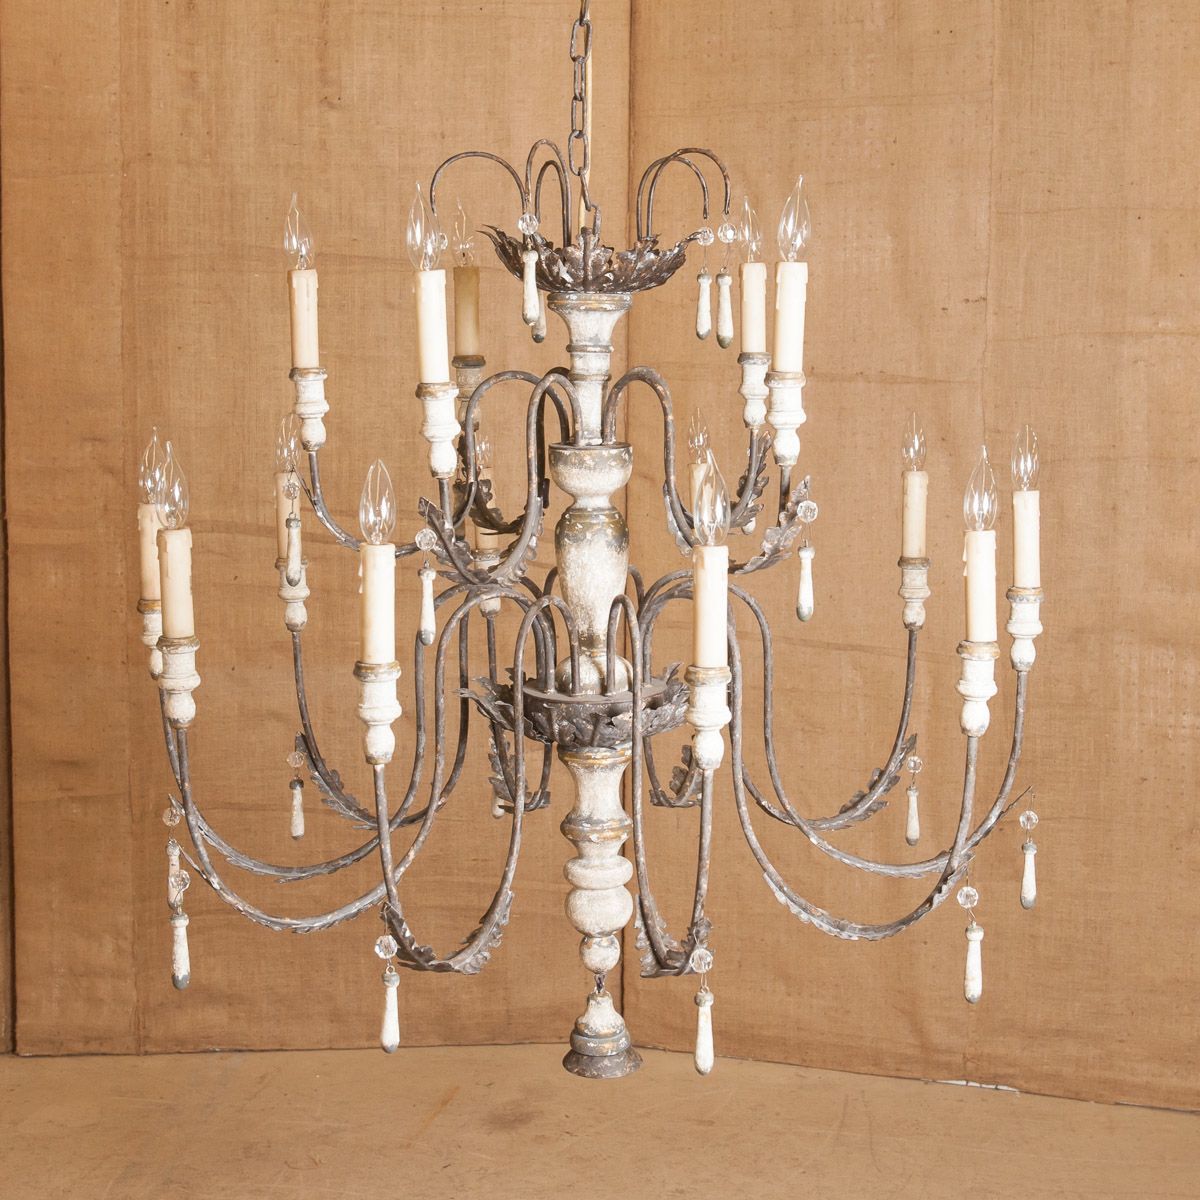 Lighting with a sense of history. Aged patina, carved details and a neutral color. Our Venetian chandelier reflects the Old World charm of Classic European design. Two tiers with 15 curved metal arms that provide plenty of warm light. Handcrafted of